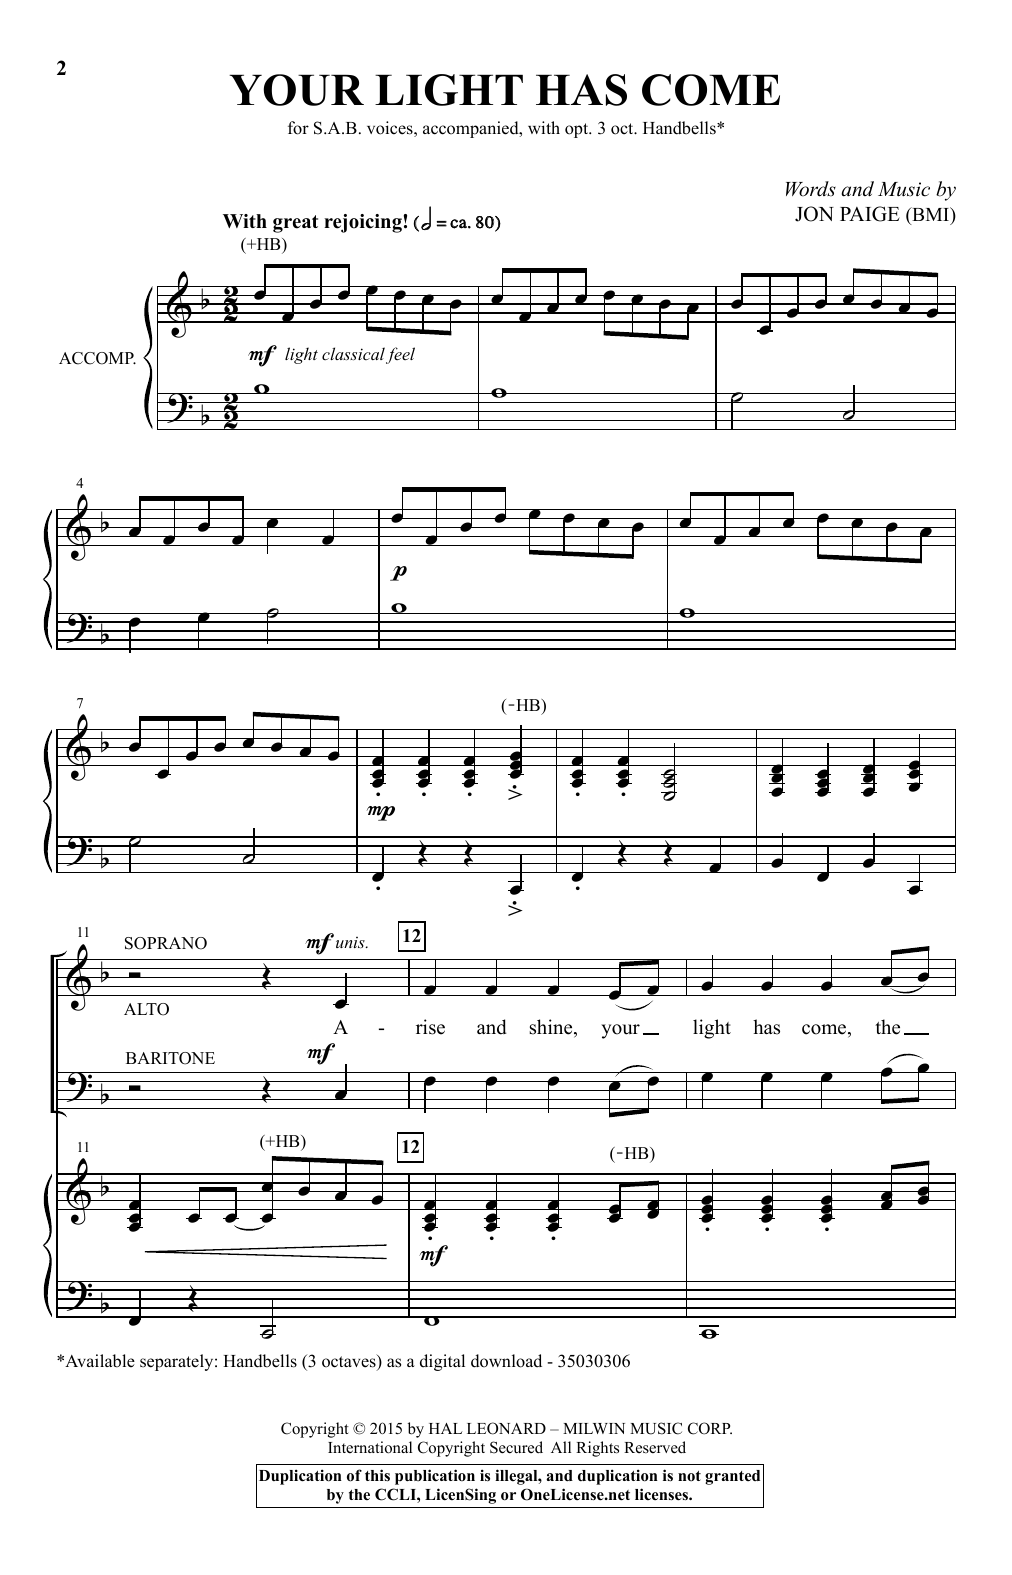 Download Jon Paige Your Light Has Come Sheet Music